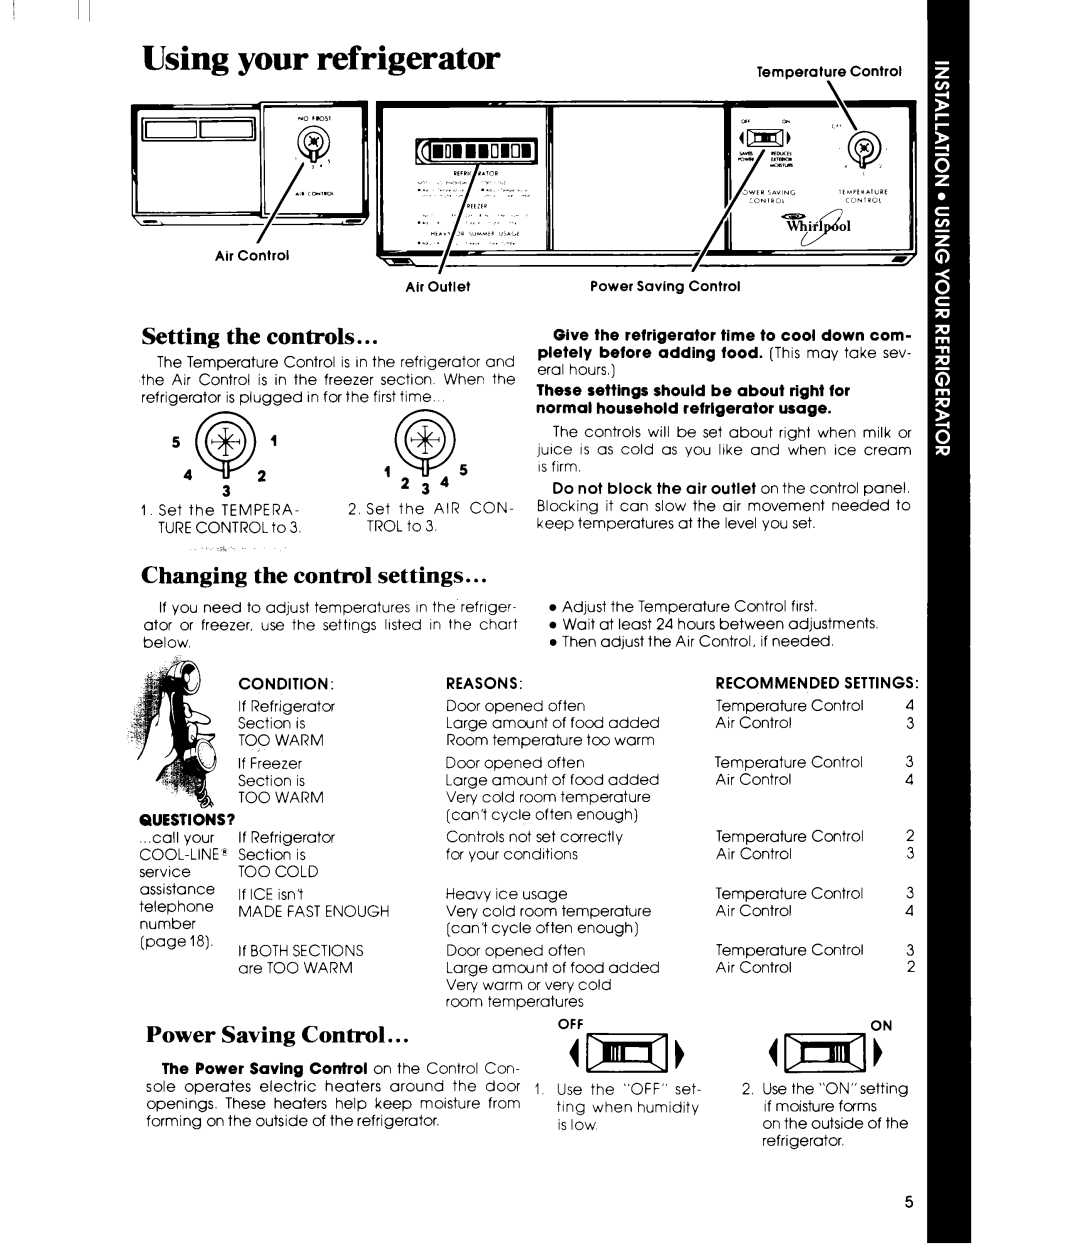 Whirlpool ED25PM manual Using your refrigerator, Setting the controls, Changing the control settings, Power Saving Control 